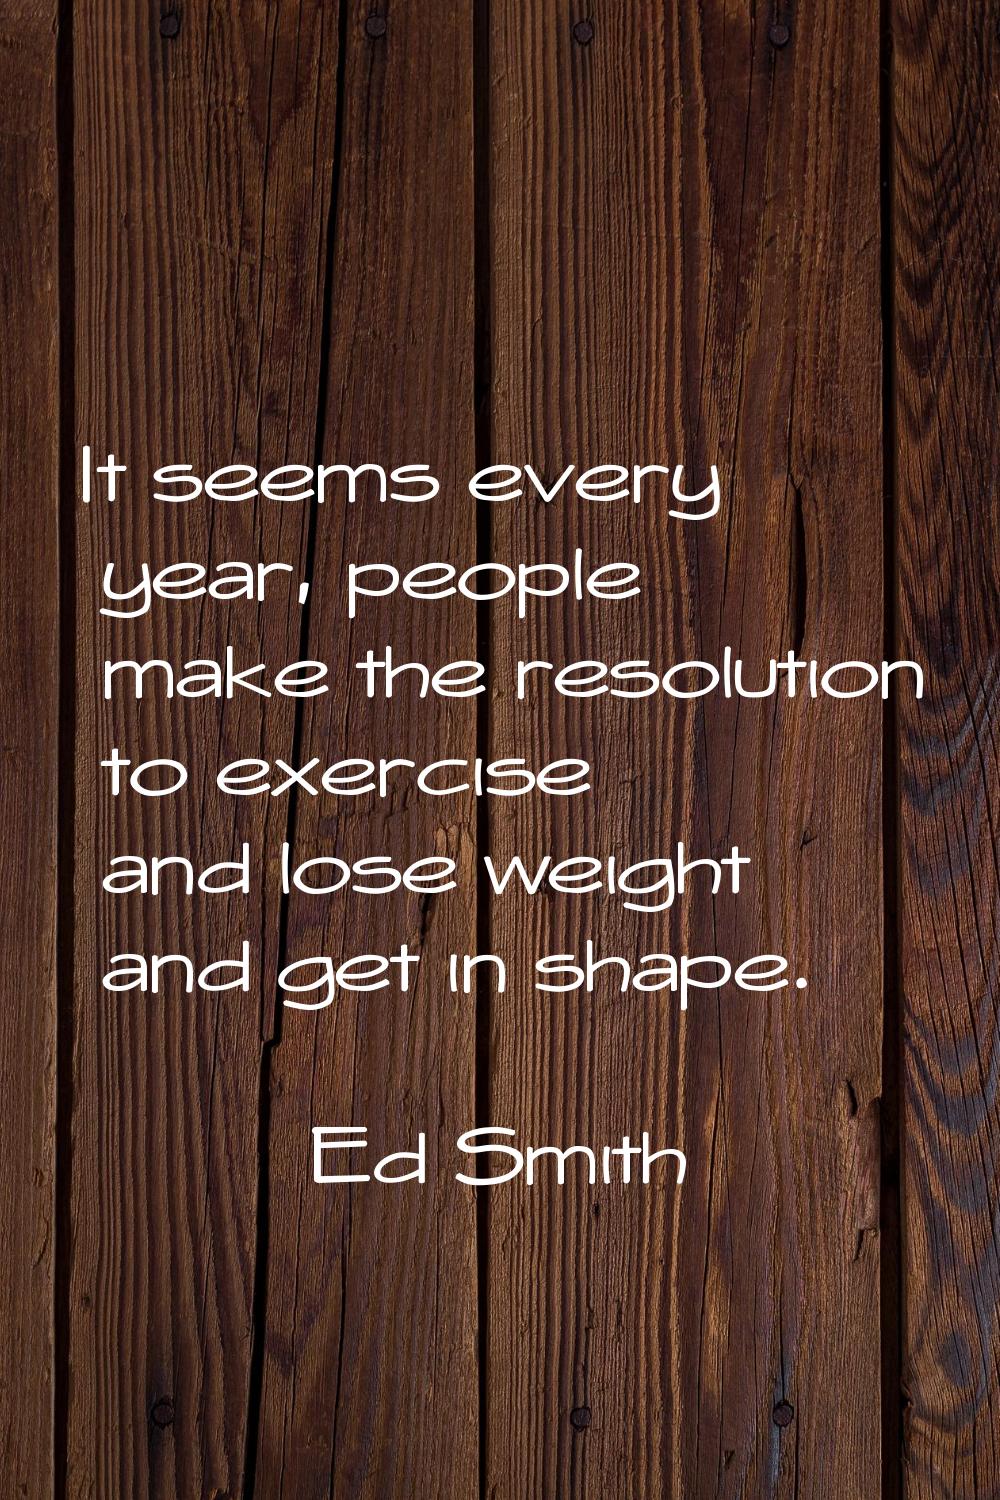 It seems every year, people make the resolution to exercise and lose weight and get in shape.